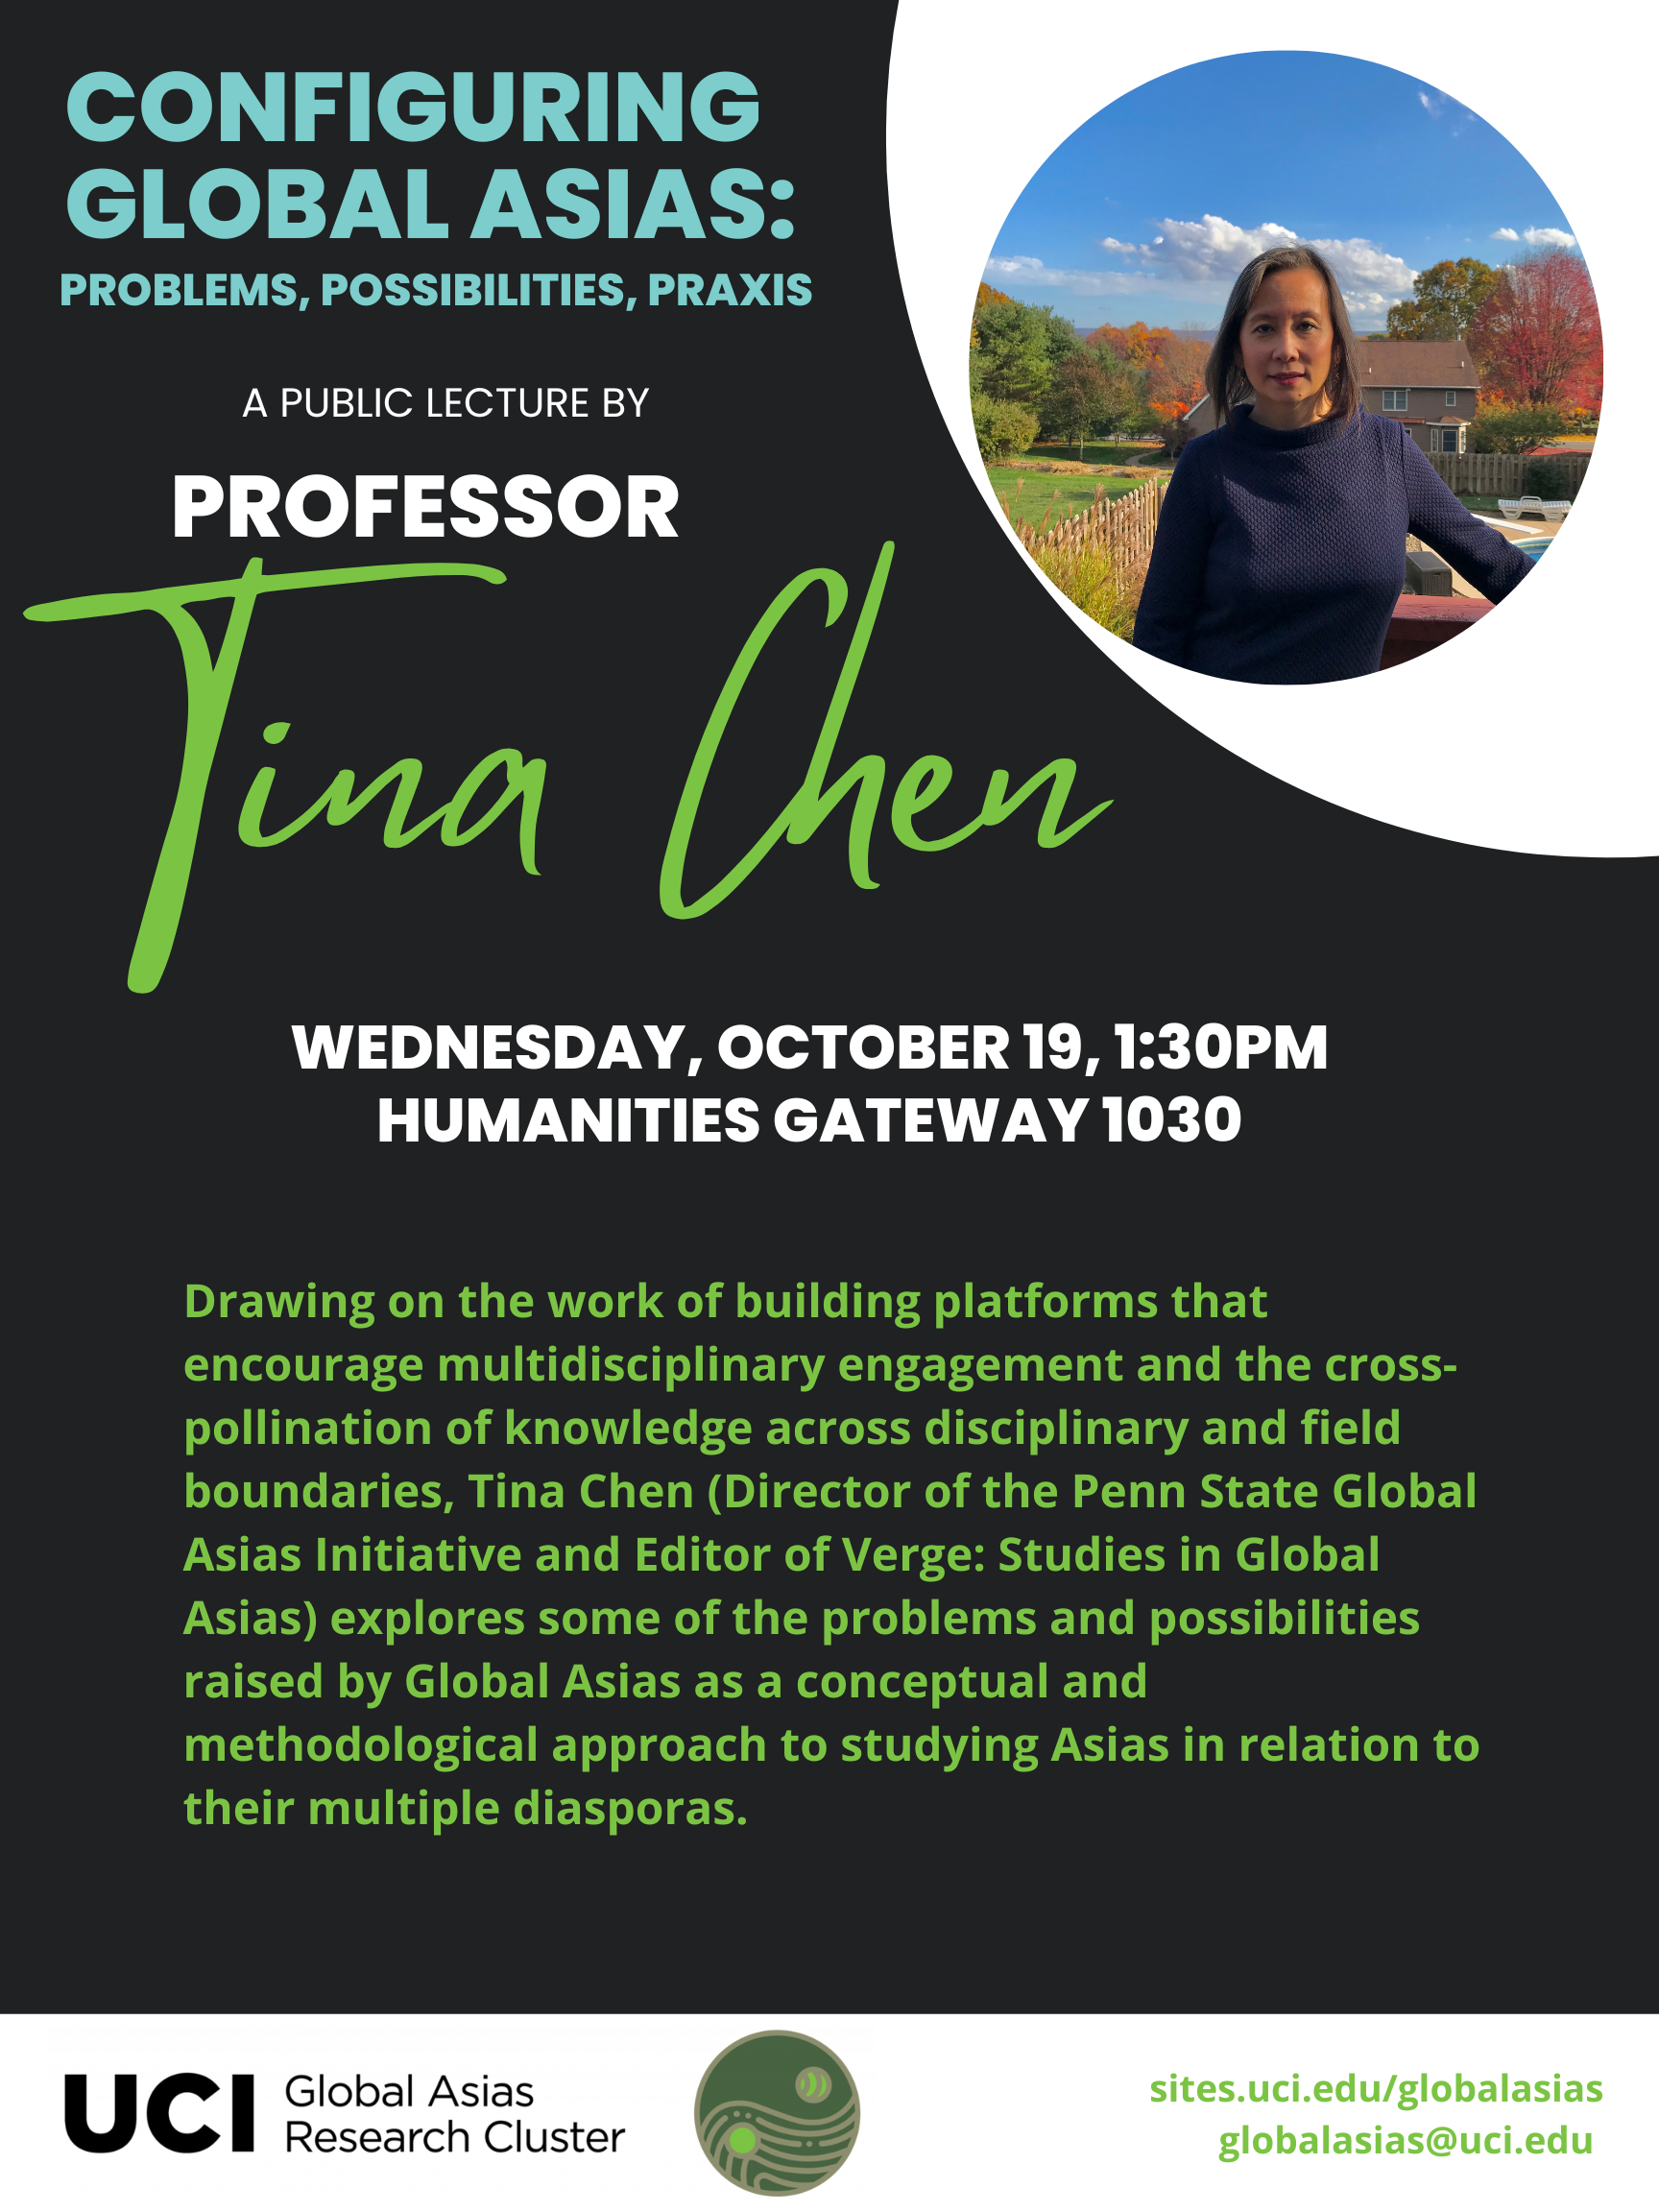 Even flyer for Tina Chen's lecture